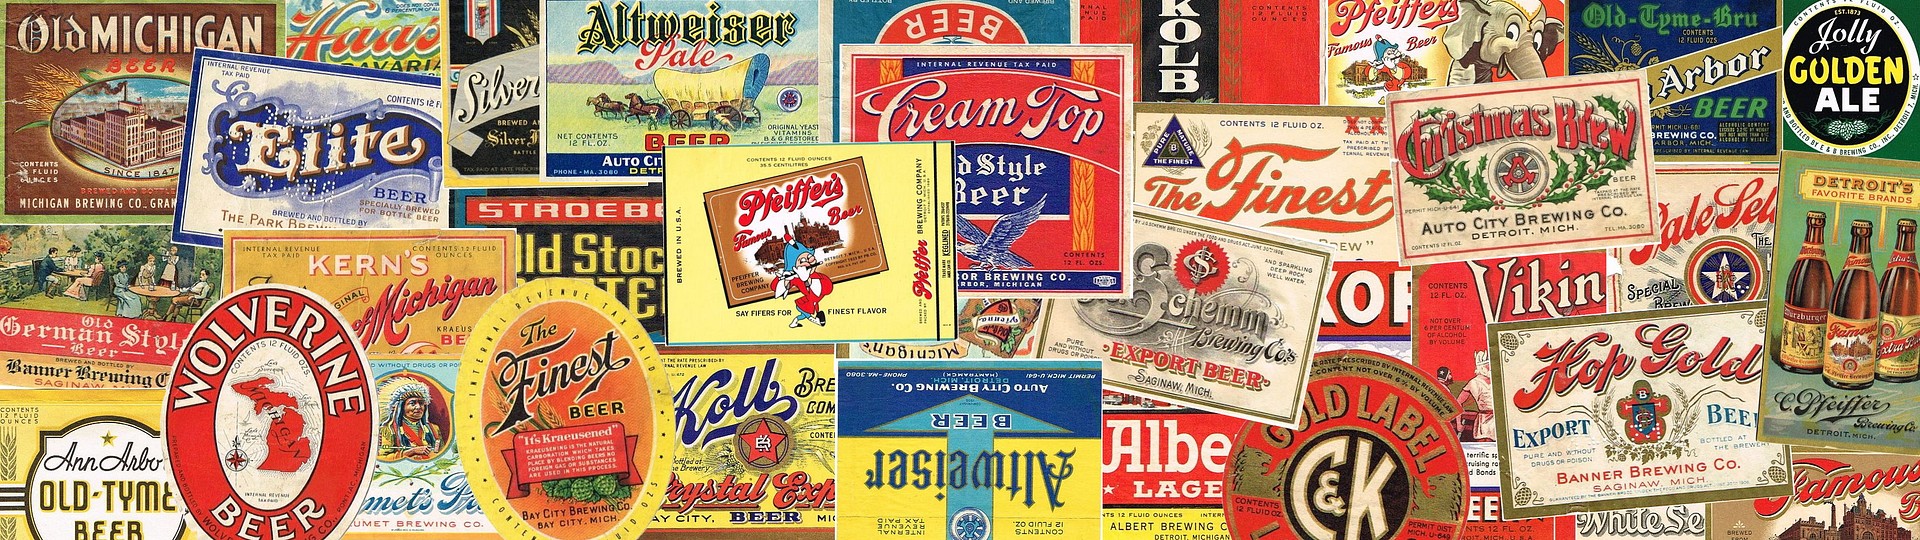 Day 2 - TavernTrove's Tuesday Evening Vintage Michigan Beer Label Auction by TavernTrove